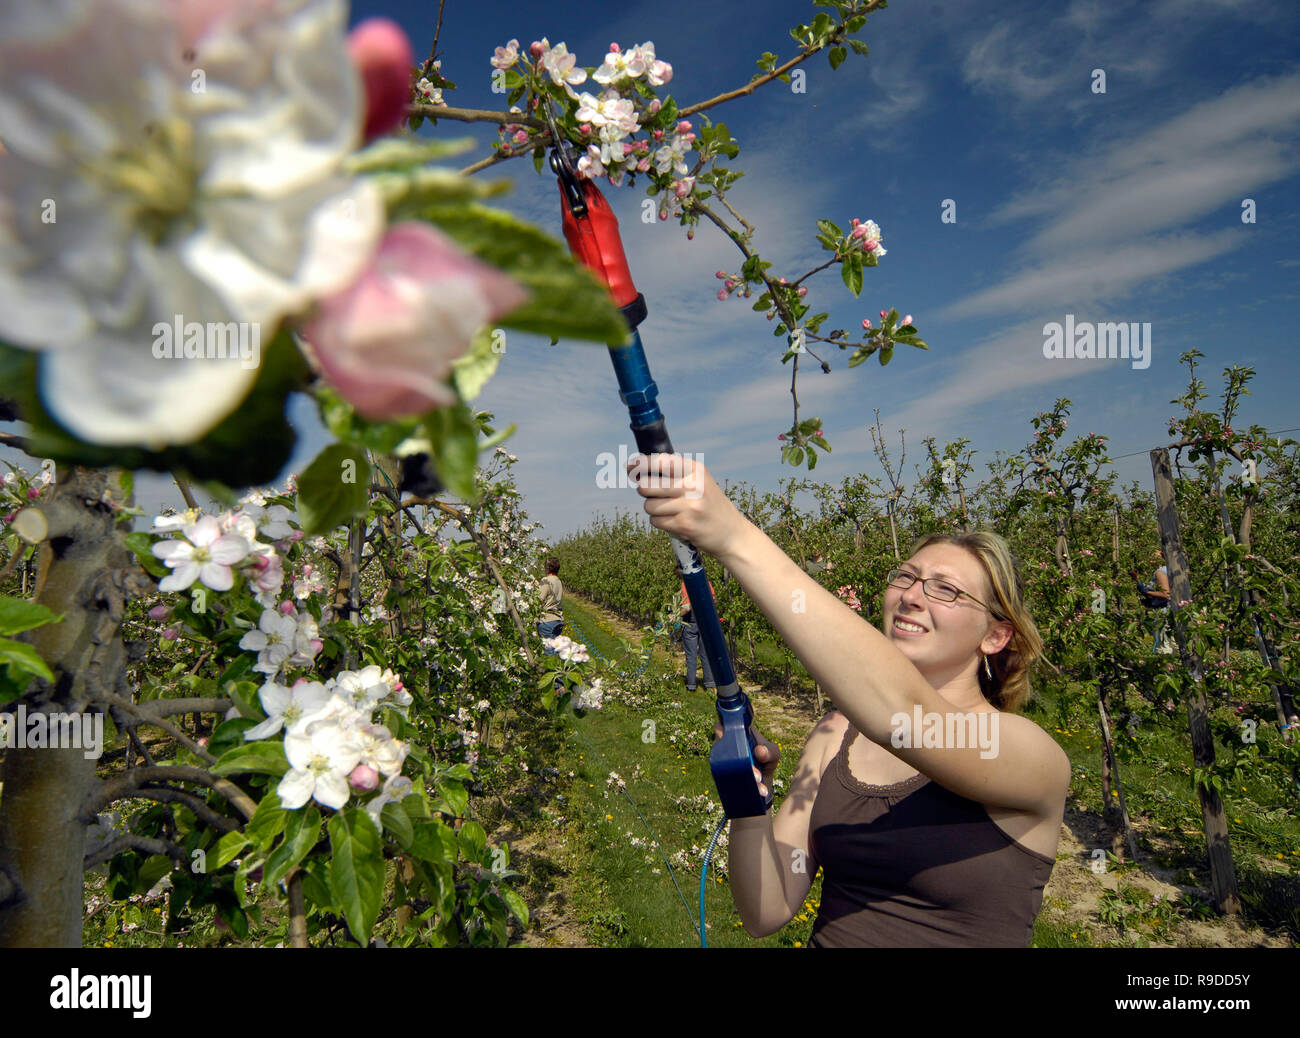 23.04.2007, Duerrweitzschen, Saxony, Germany - Christin Hettwer from Grimma cuts the apple trees on a plantation company Sachsen fruit. 0UX070423D447C Stock Photo